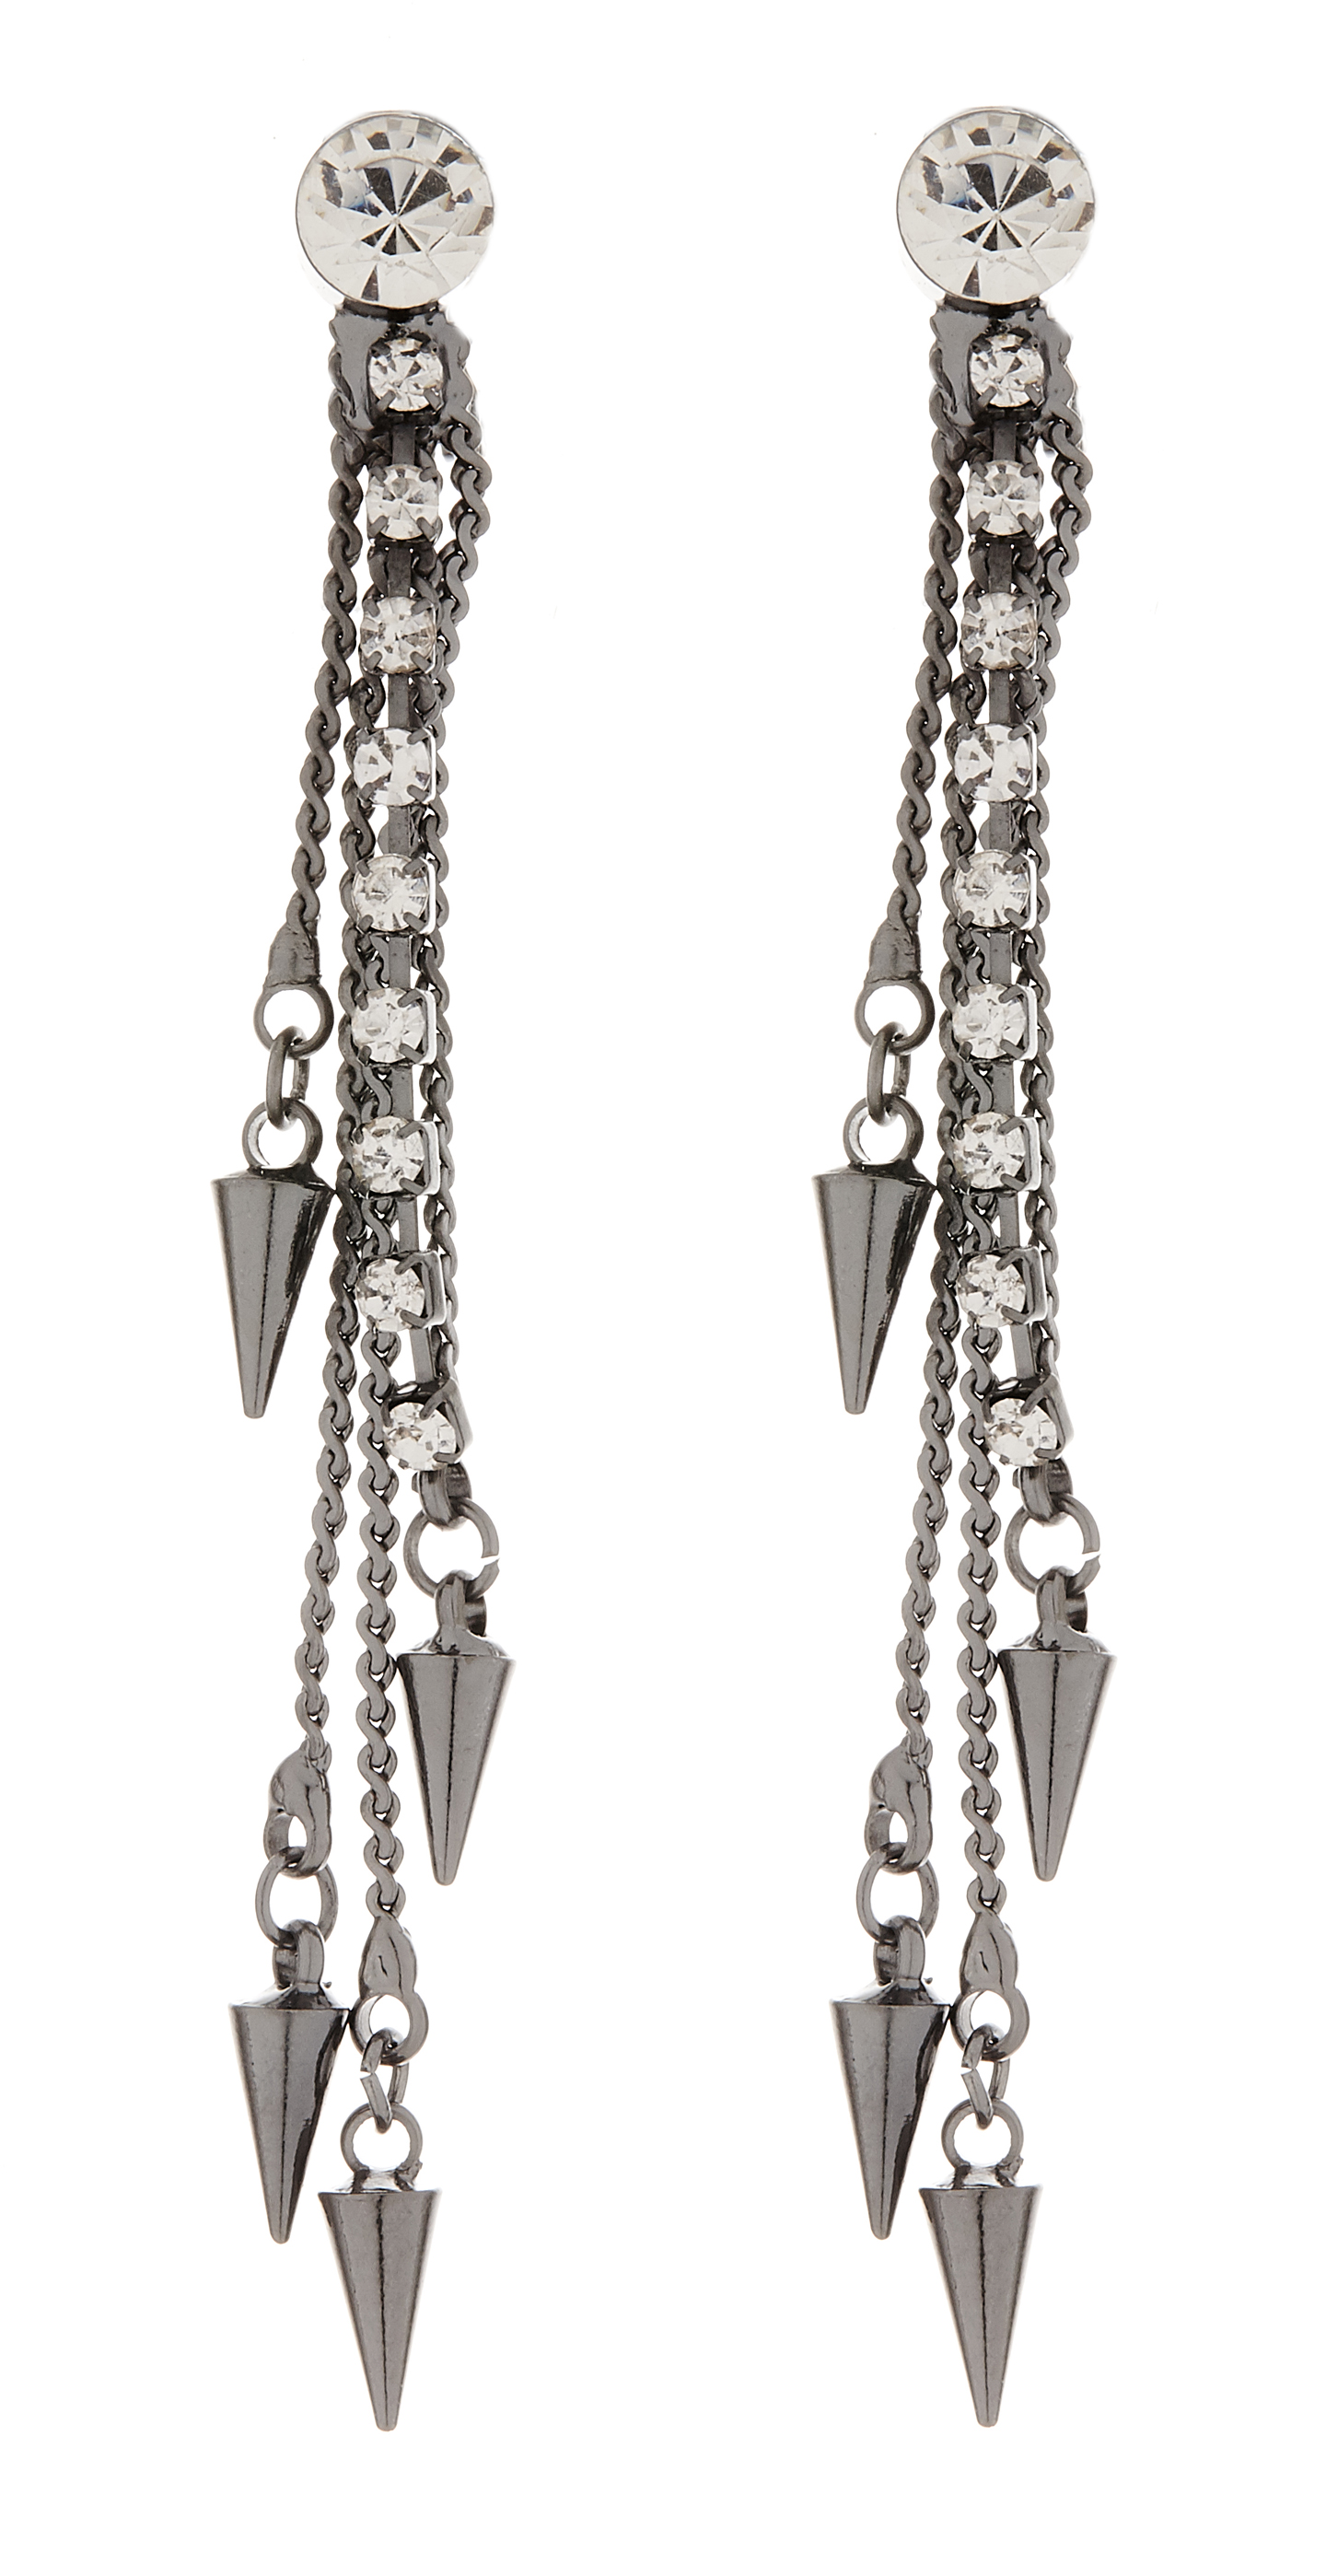 Clip on earrings - Amy - gunmetal grey drop earring with a clear crystal strand and chains